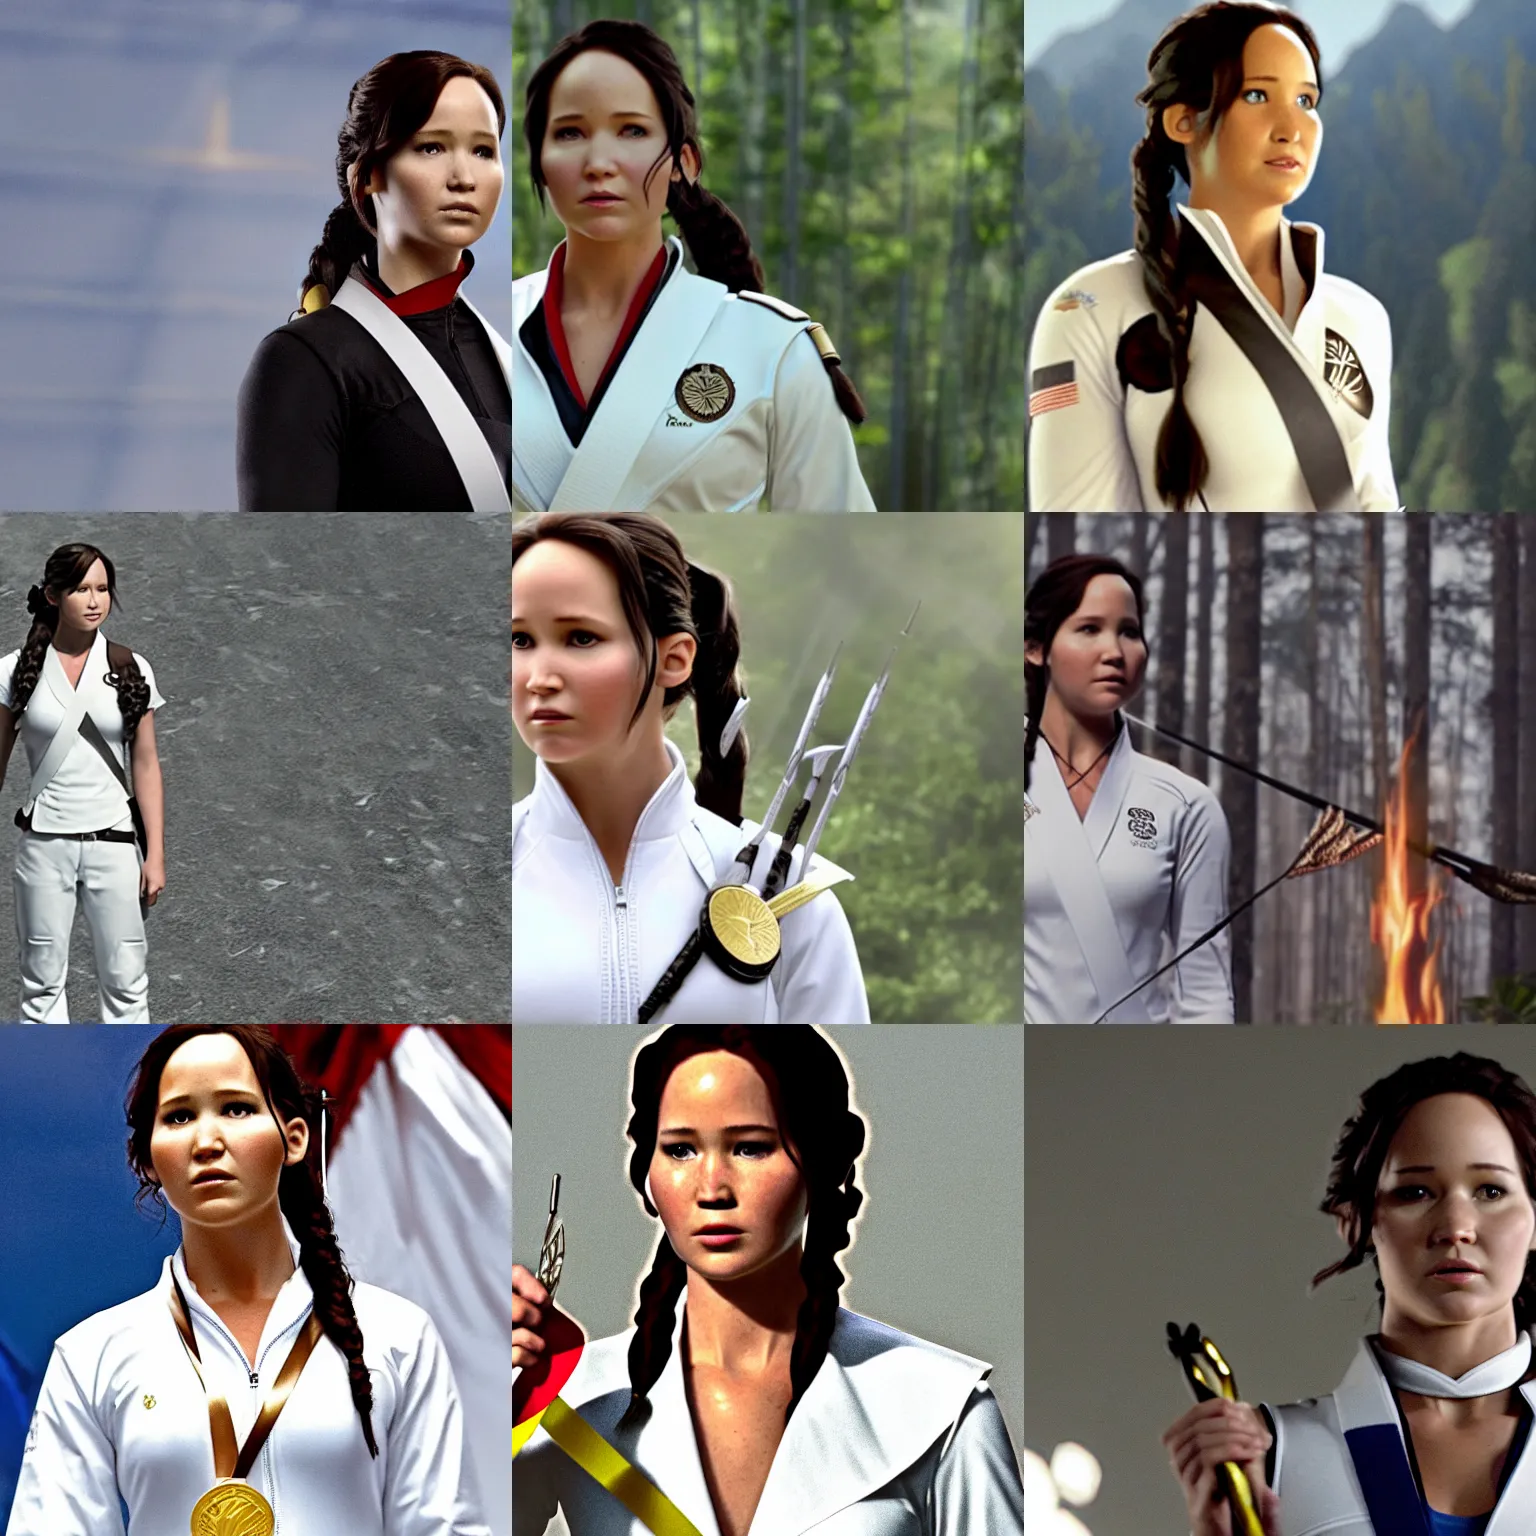 Prompt: Film still, establishing shot of Katniss Everdeen on a podium, wearing a white gi, wearing a gold medal around her neck